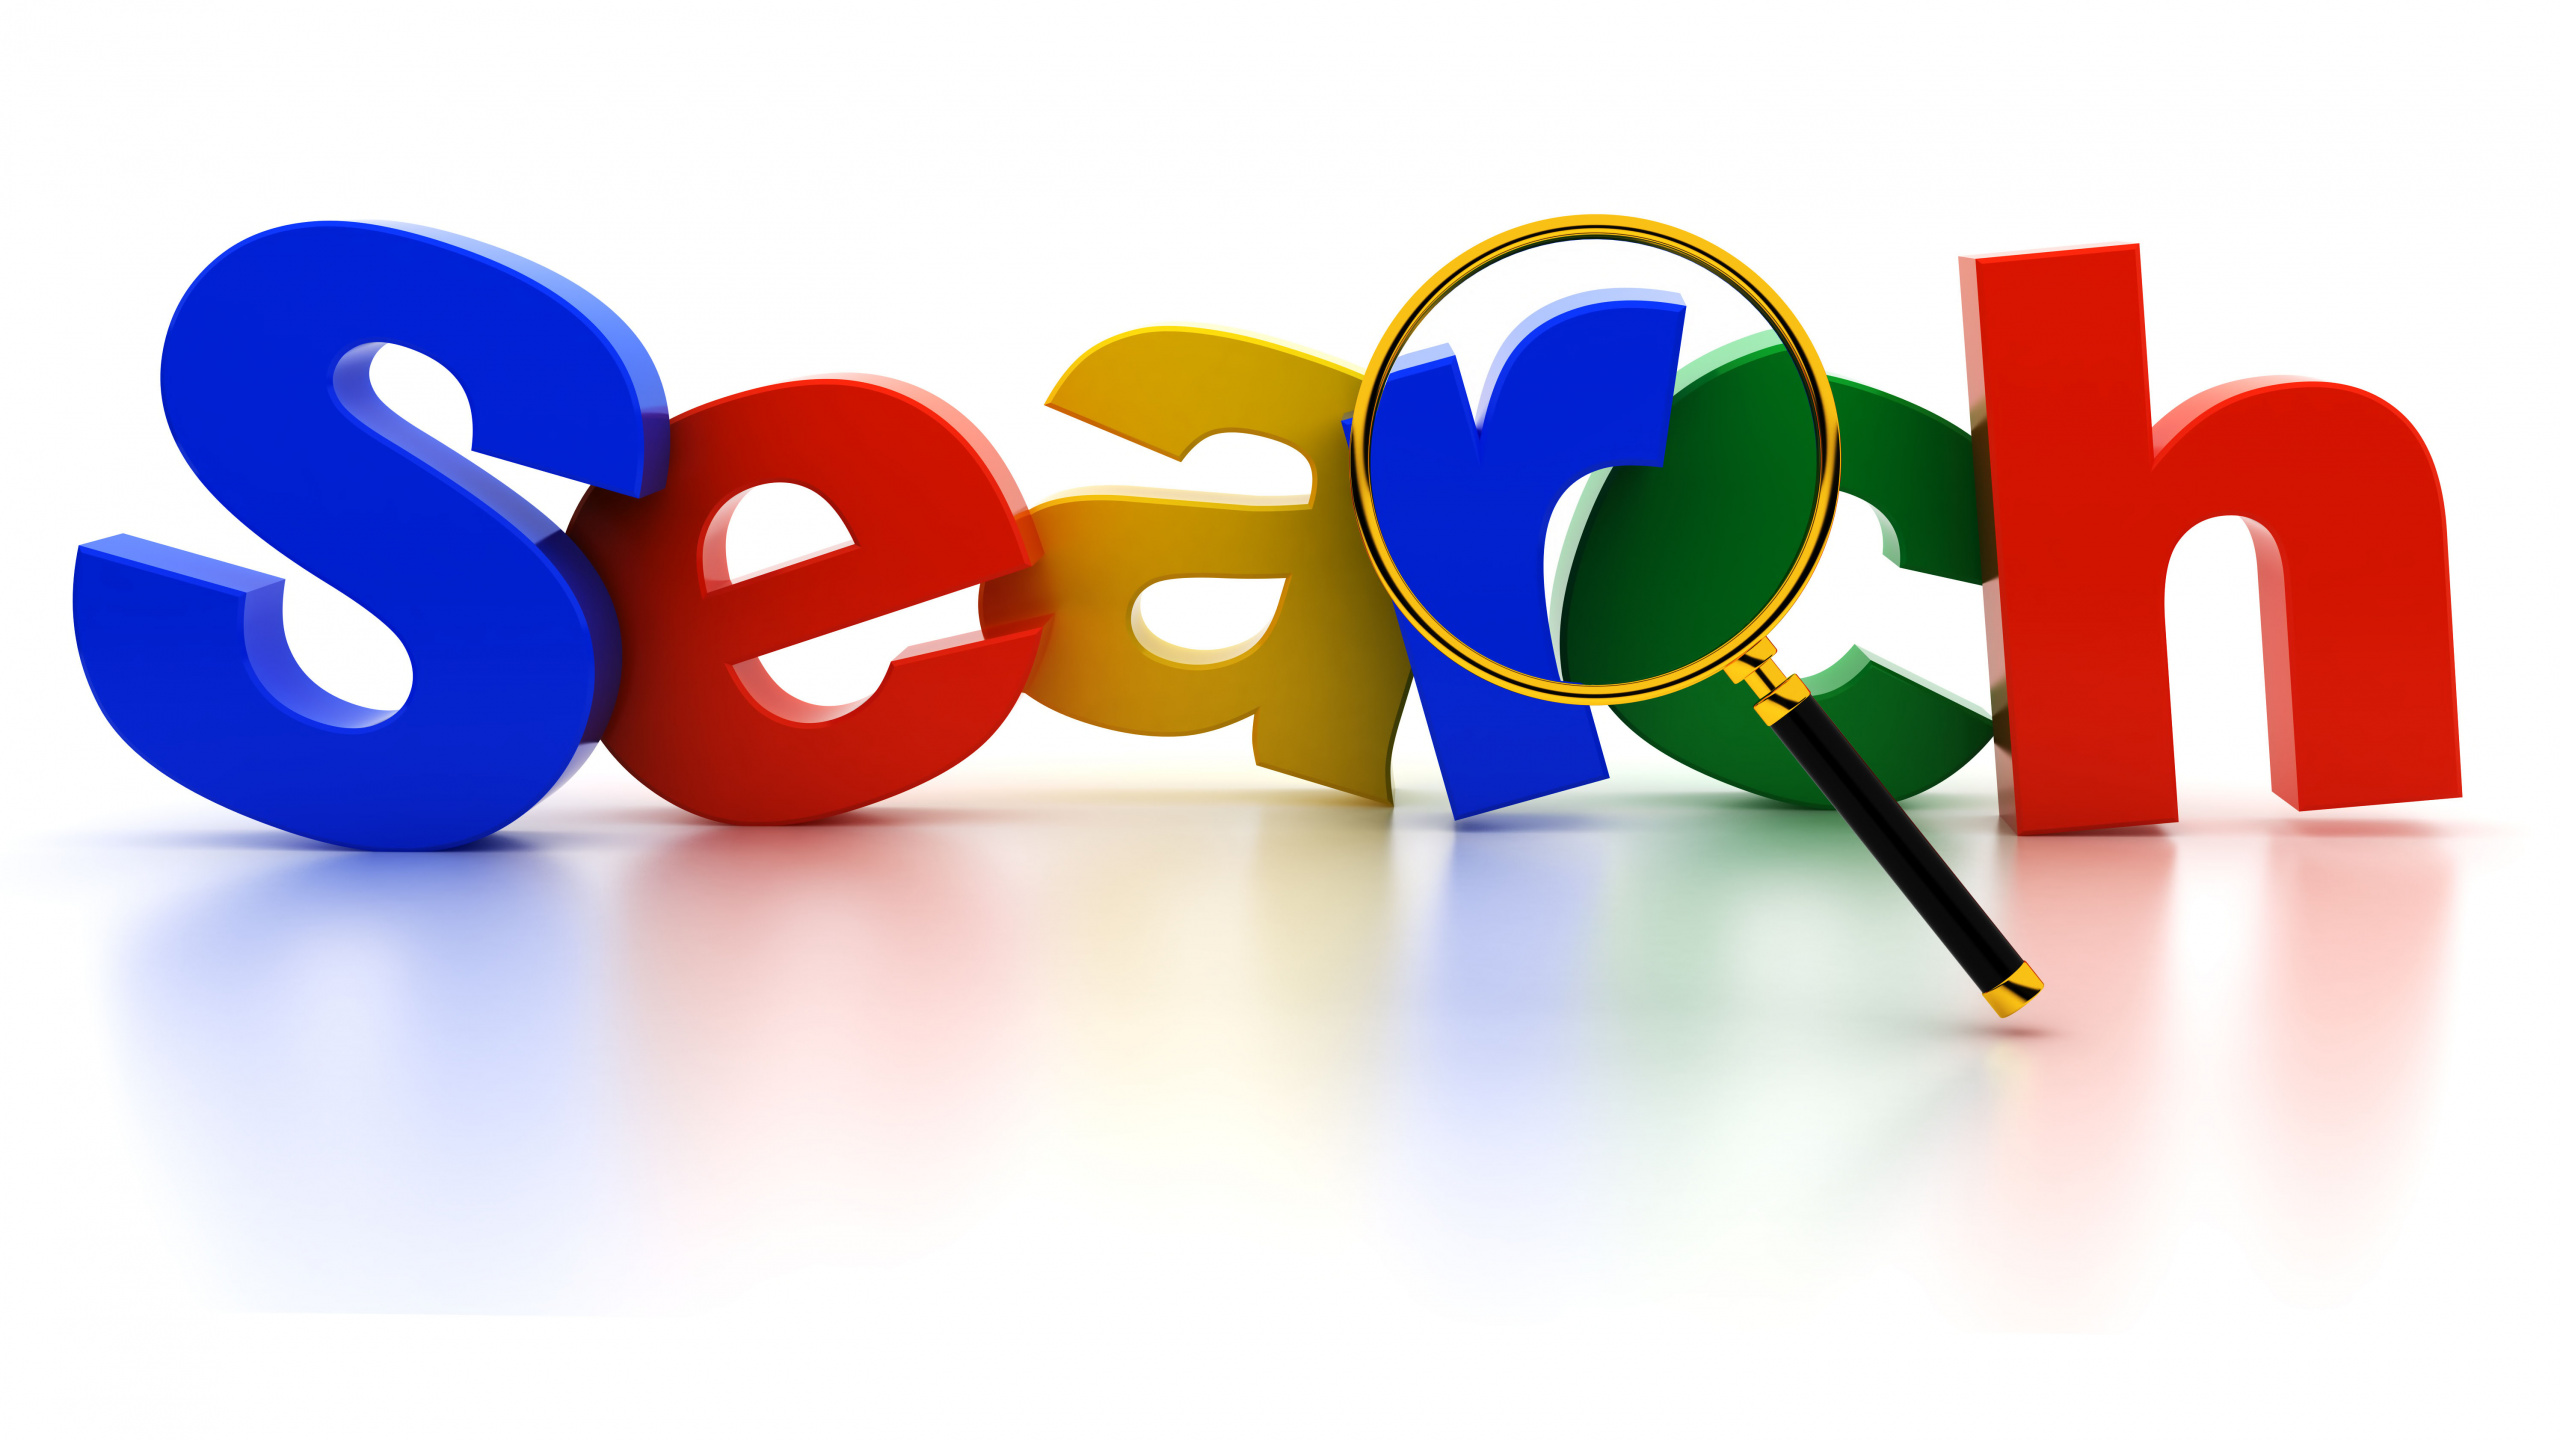 Search Engine Optimization, Web Search Engine, Google Search, Search Engine, Text. Wallpaper in 2560x1440 Resolution